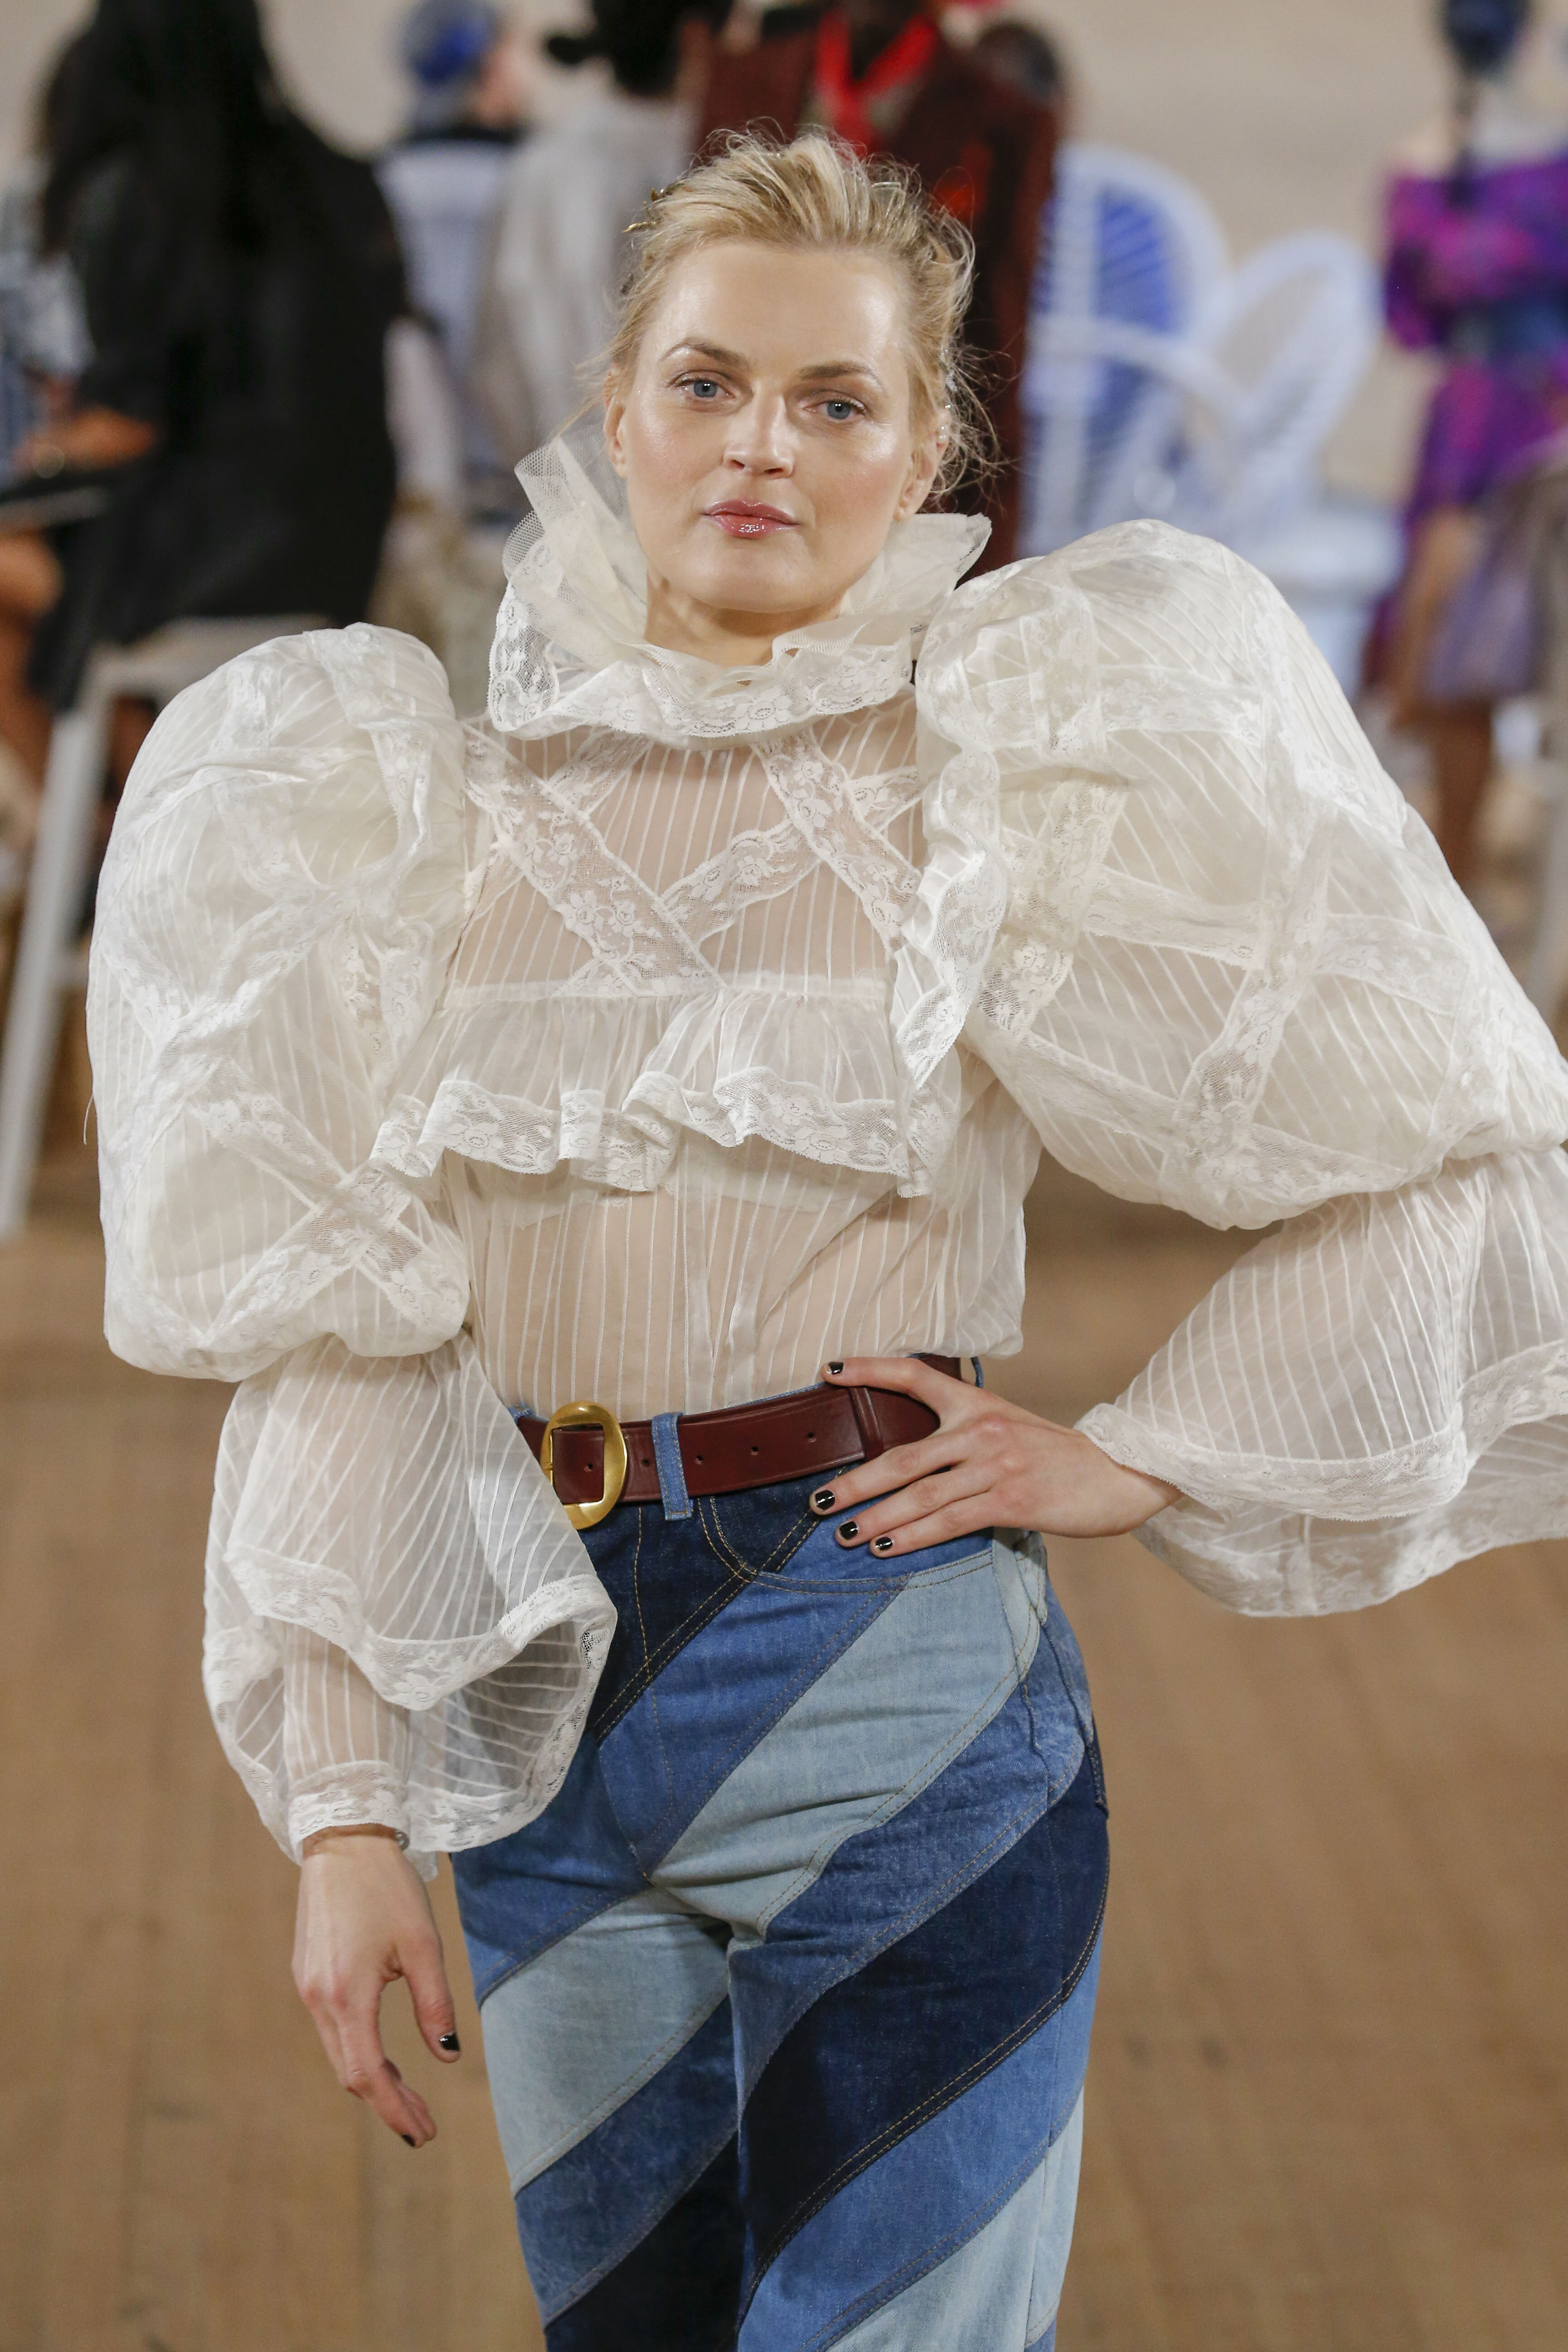 Puff Sleeve Tops Are Trending for Spring 2020